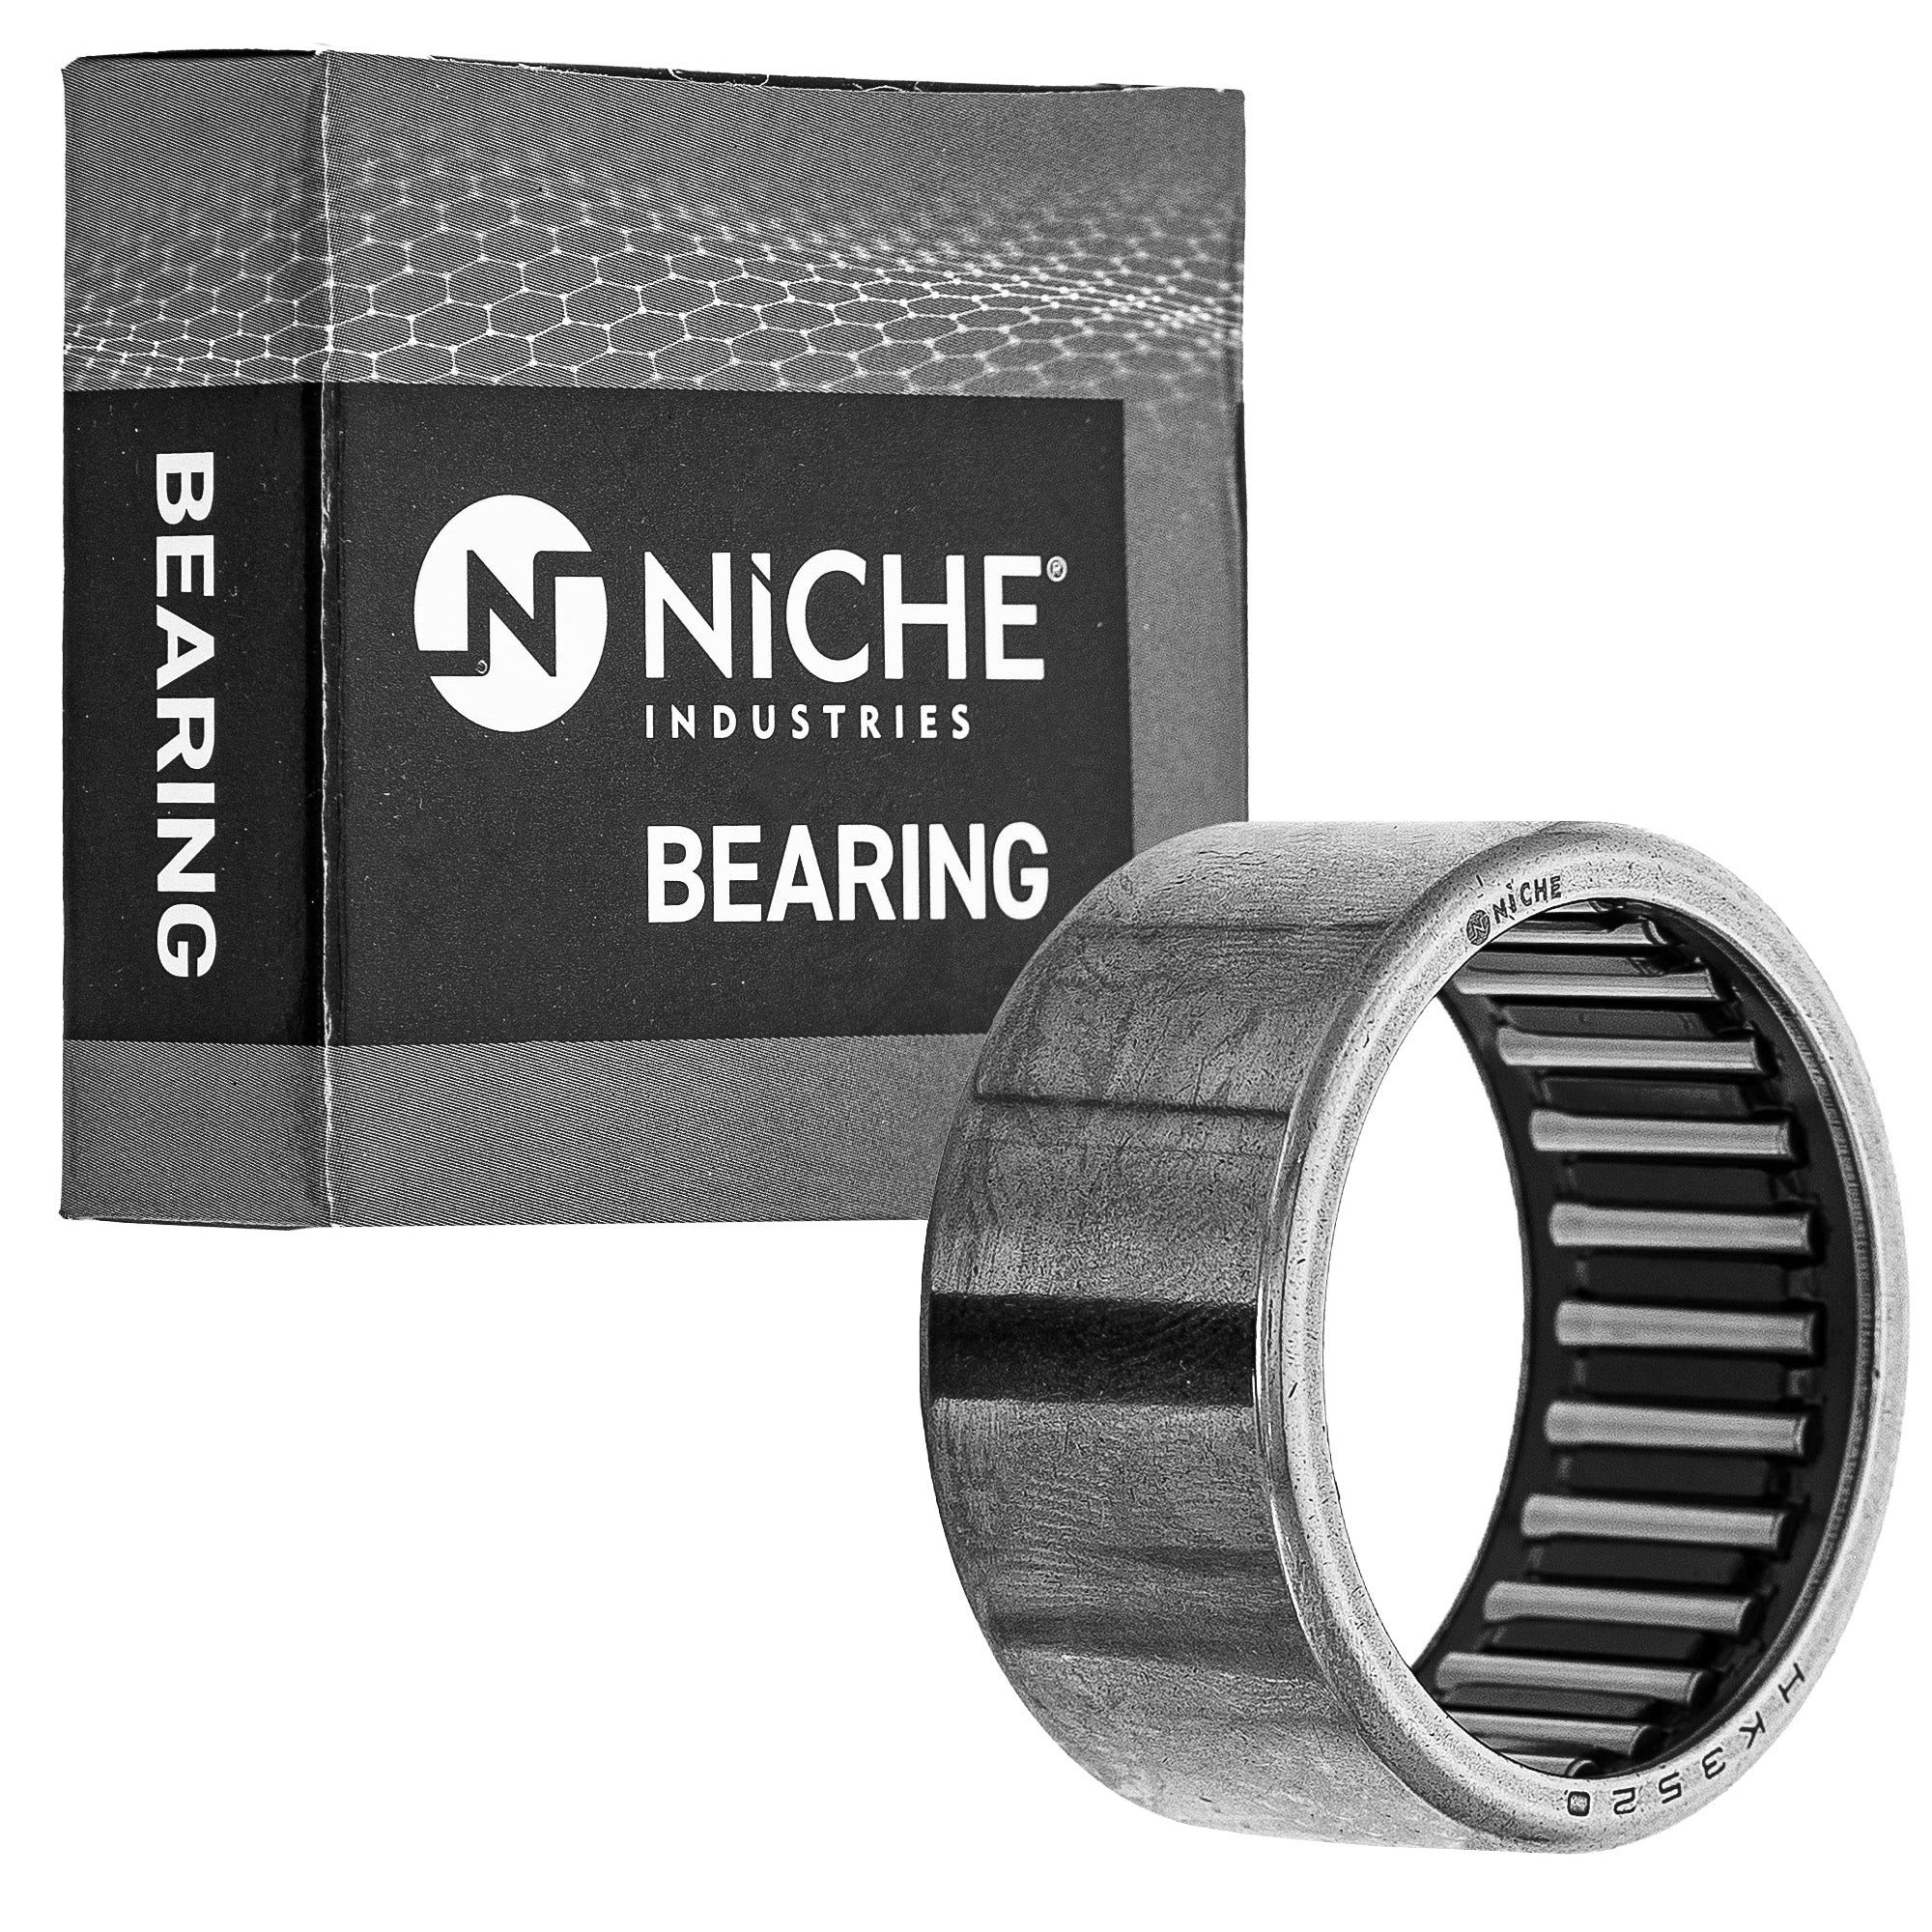 NICHE 519-CBB2294R Bearing & Seal Kit 10-Pack for zOTHER YZF FZ1